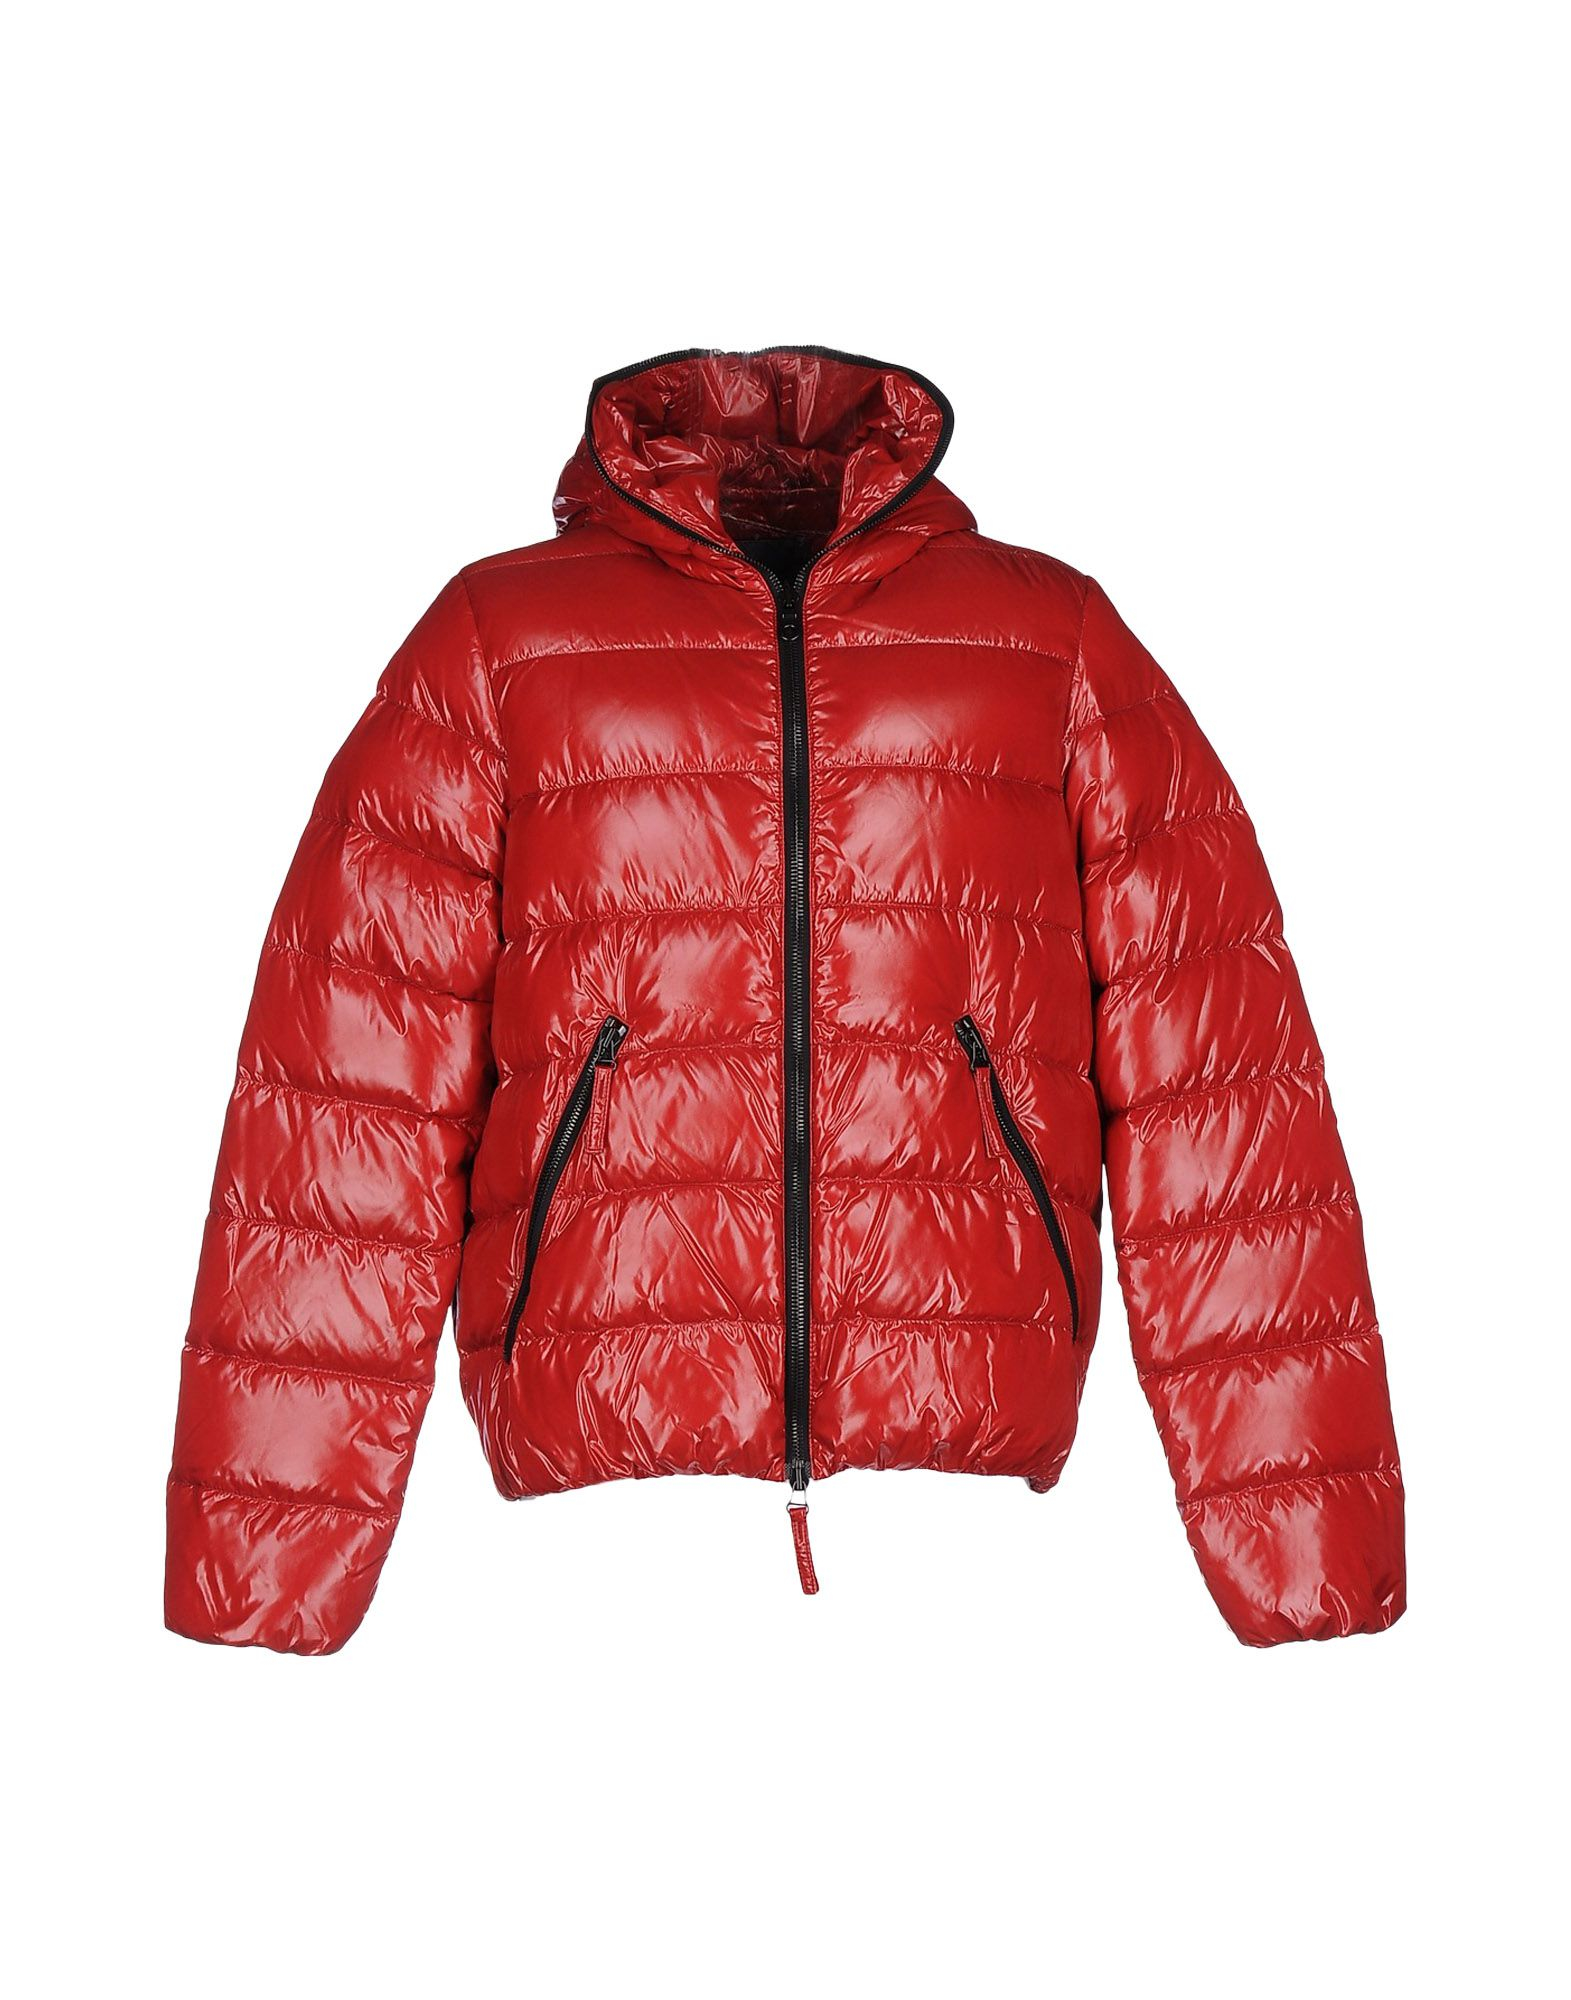 Lyst - Duvetica Down Jacket in Red for Men